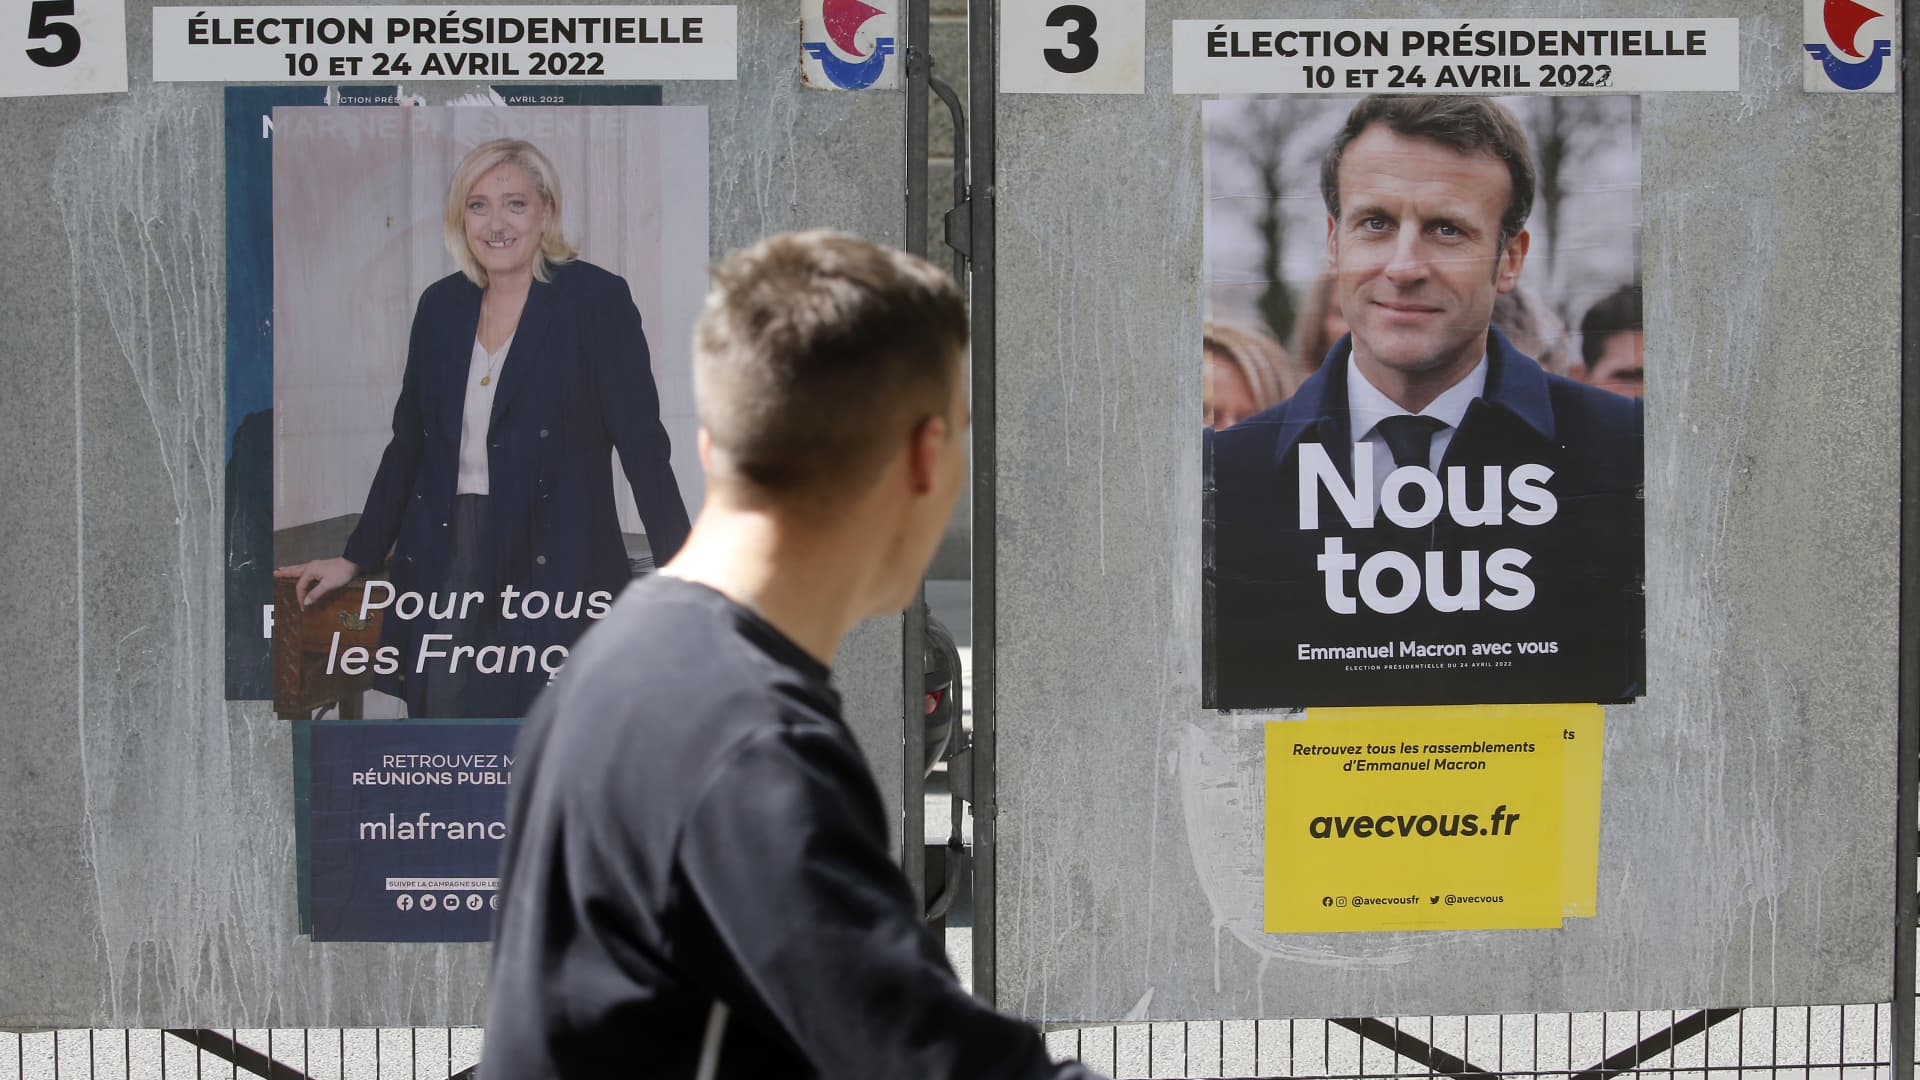 Macron faces off against far-right rival Le Pen as France heads to the polls – CNBC